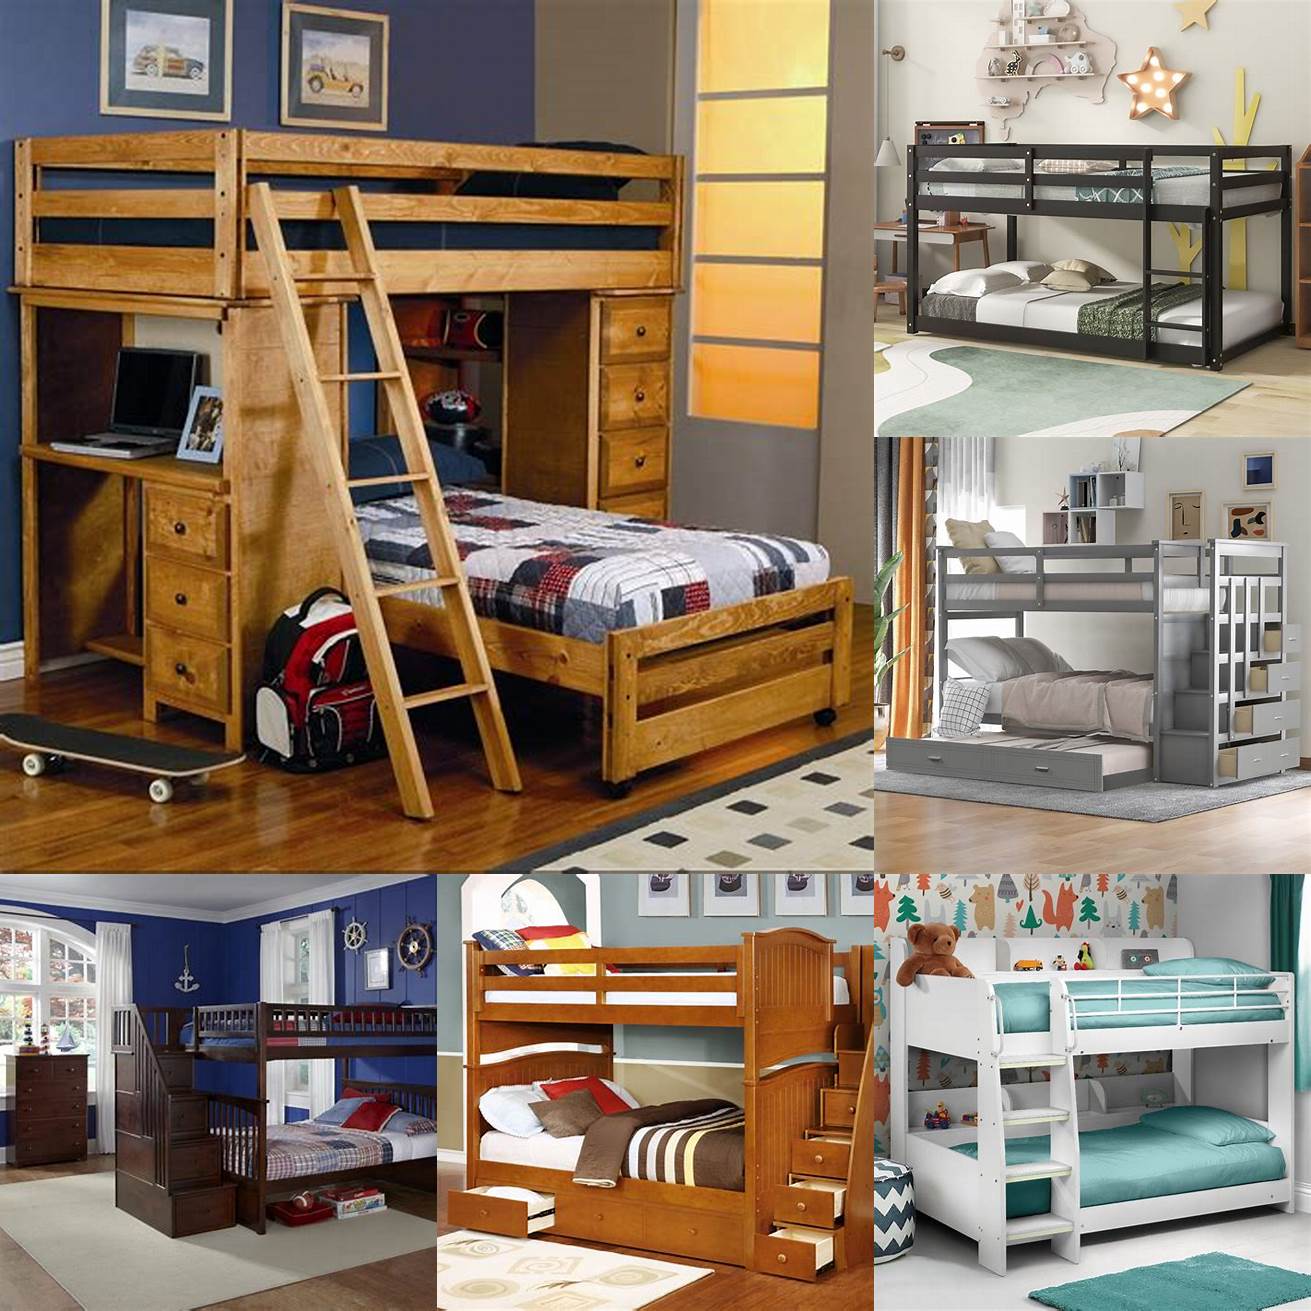 Material Boys bunk beds come in various materials including wood metal and plastic